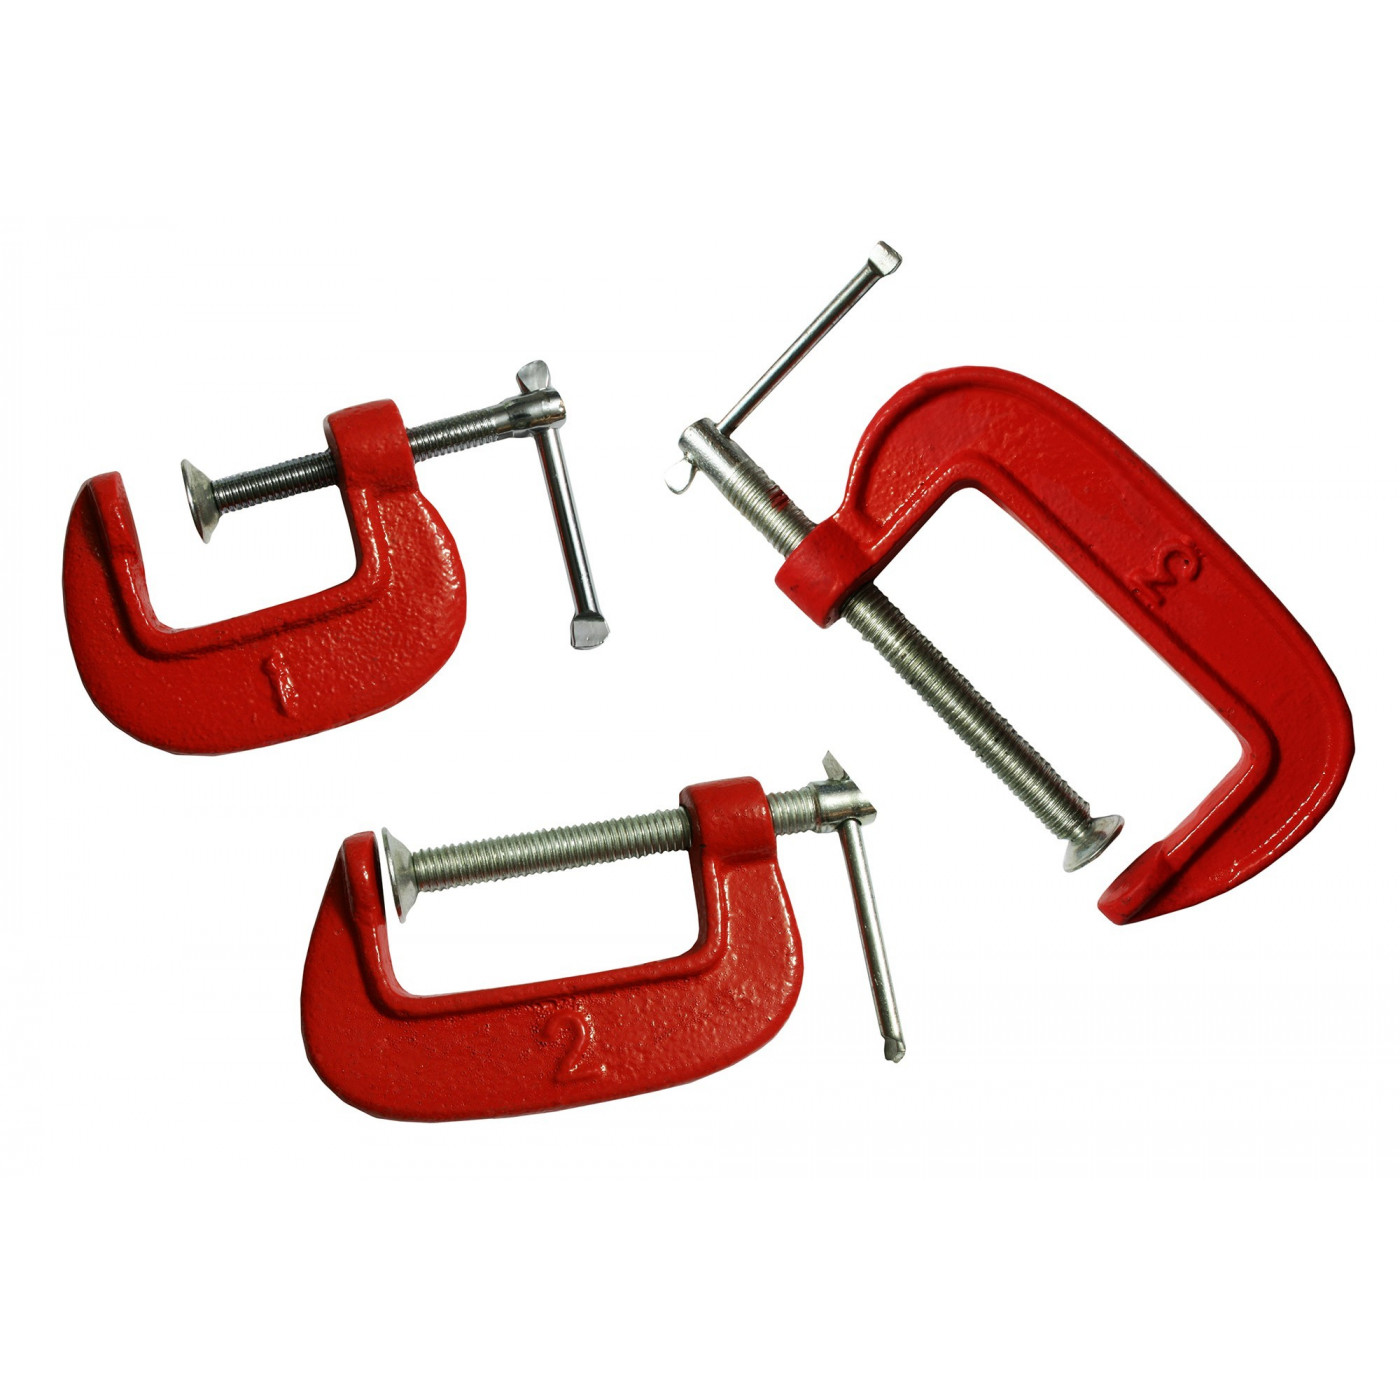 Small C/G Clamp 35-50mm,Woodworking Clamp,DIY - China Small C/G Clamp  35-50mm, Fret Saw Wood Tools Set for Juniors